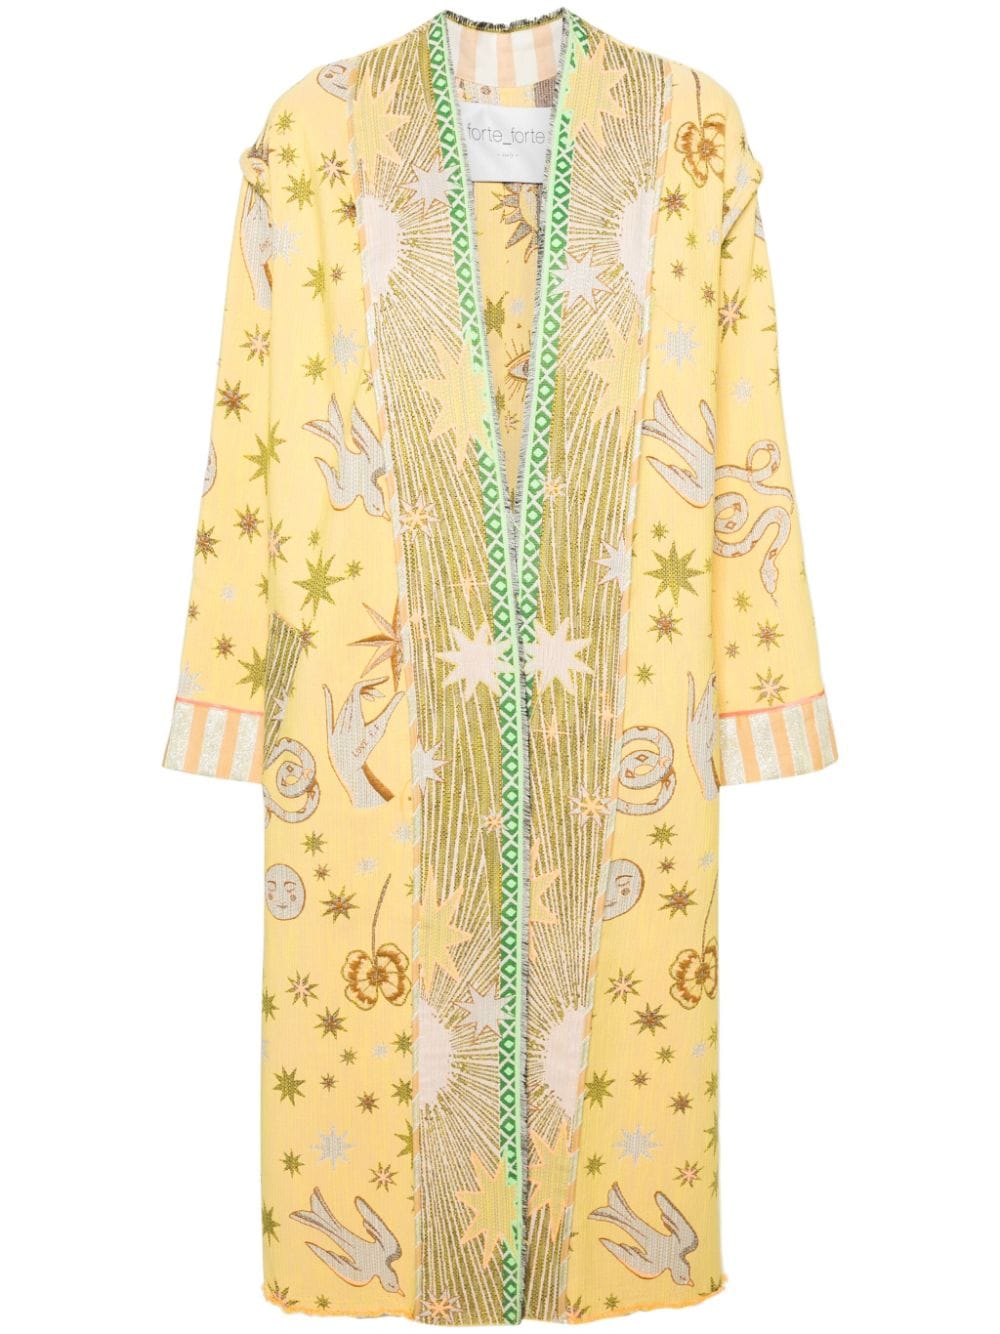 Forte Forte patterned-jacquard maxi coat - Yellow von Forte Forte